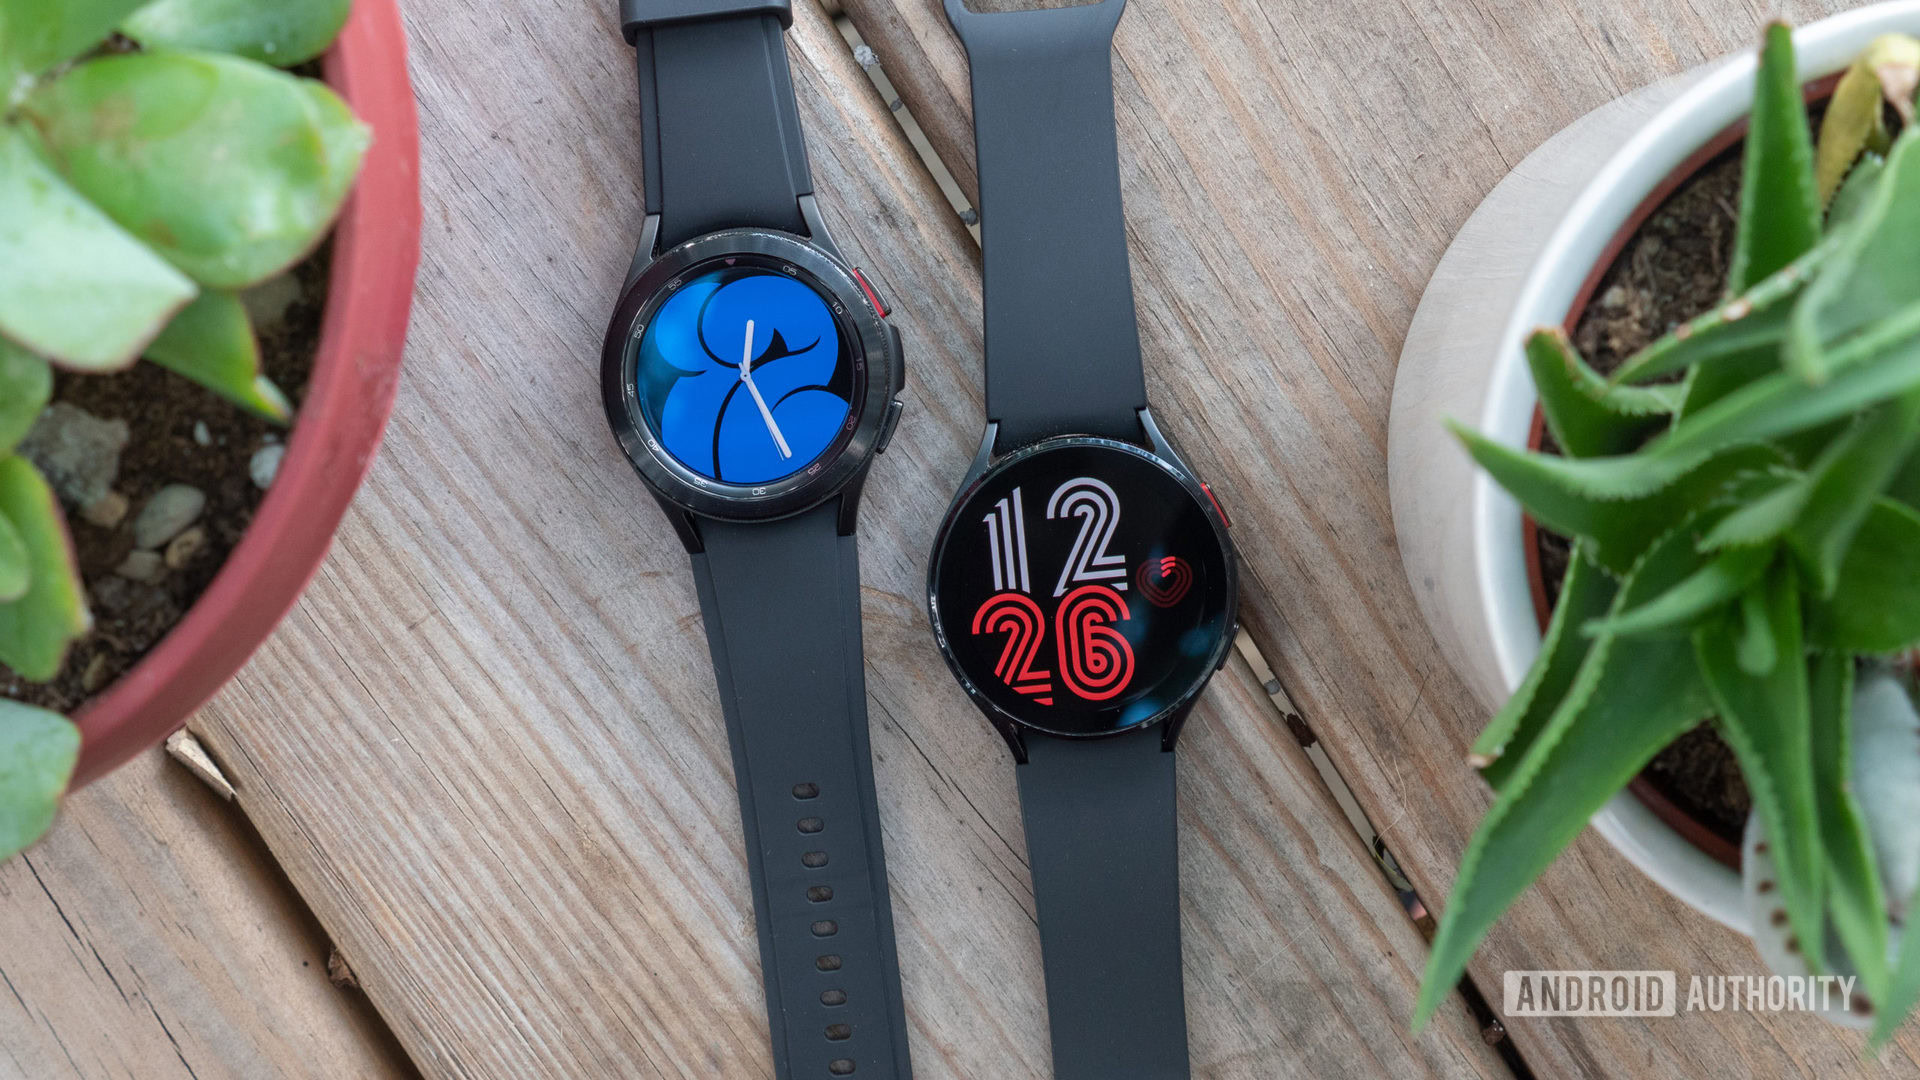 The Samsung Galaxy Watch 4 and Samsung Galaxy Watch 4 Classic on the table.